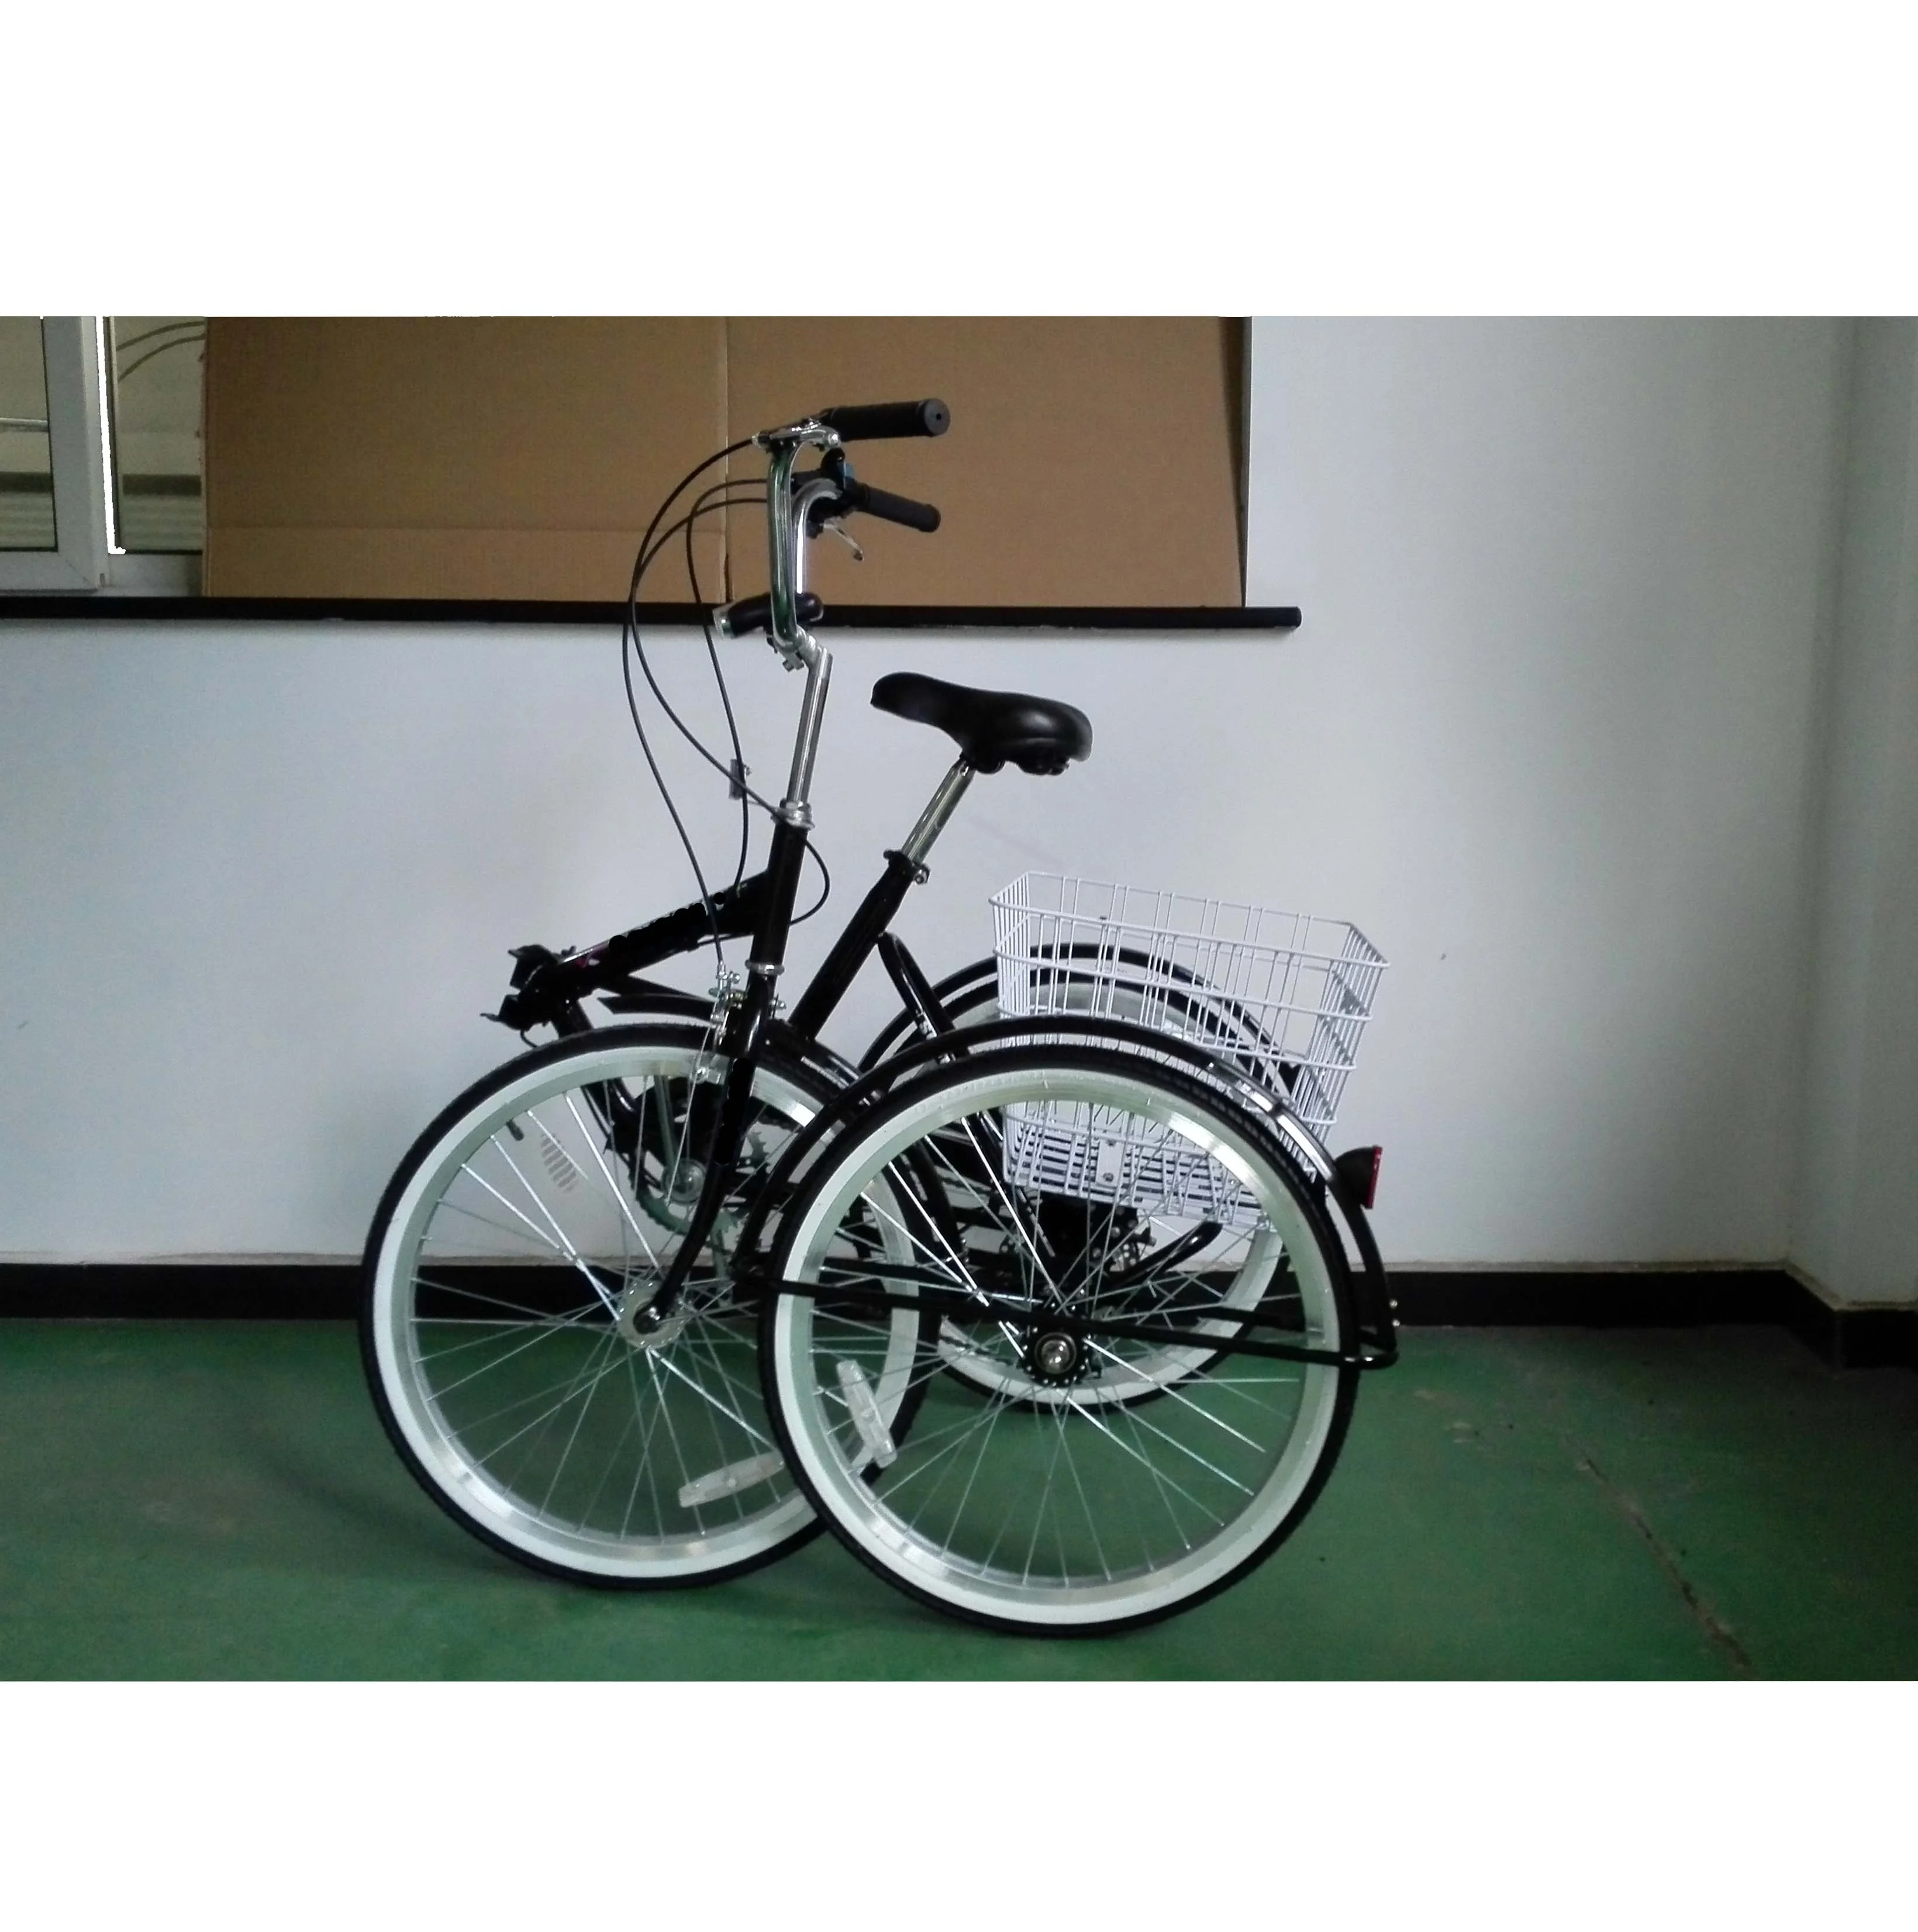 folding tricycle adults